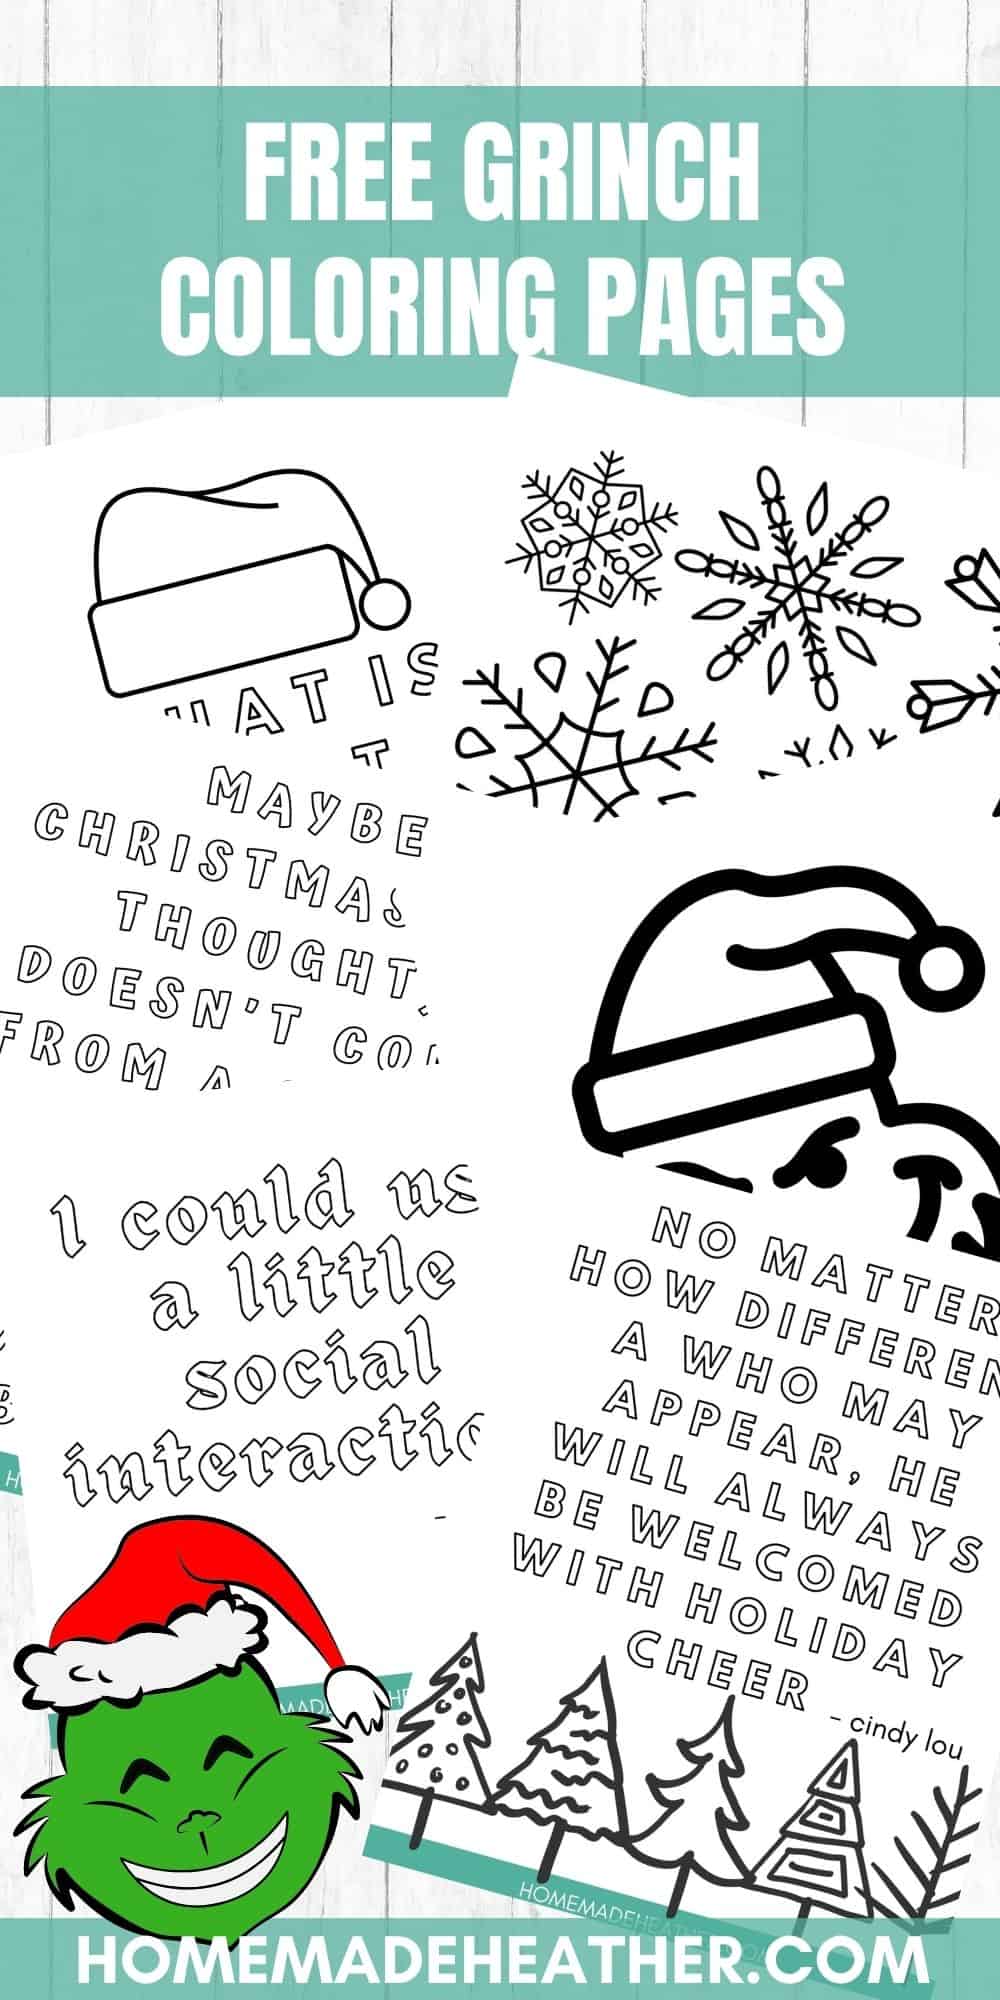 Free grinch printable coloring pages homemade heather